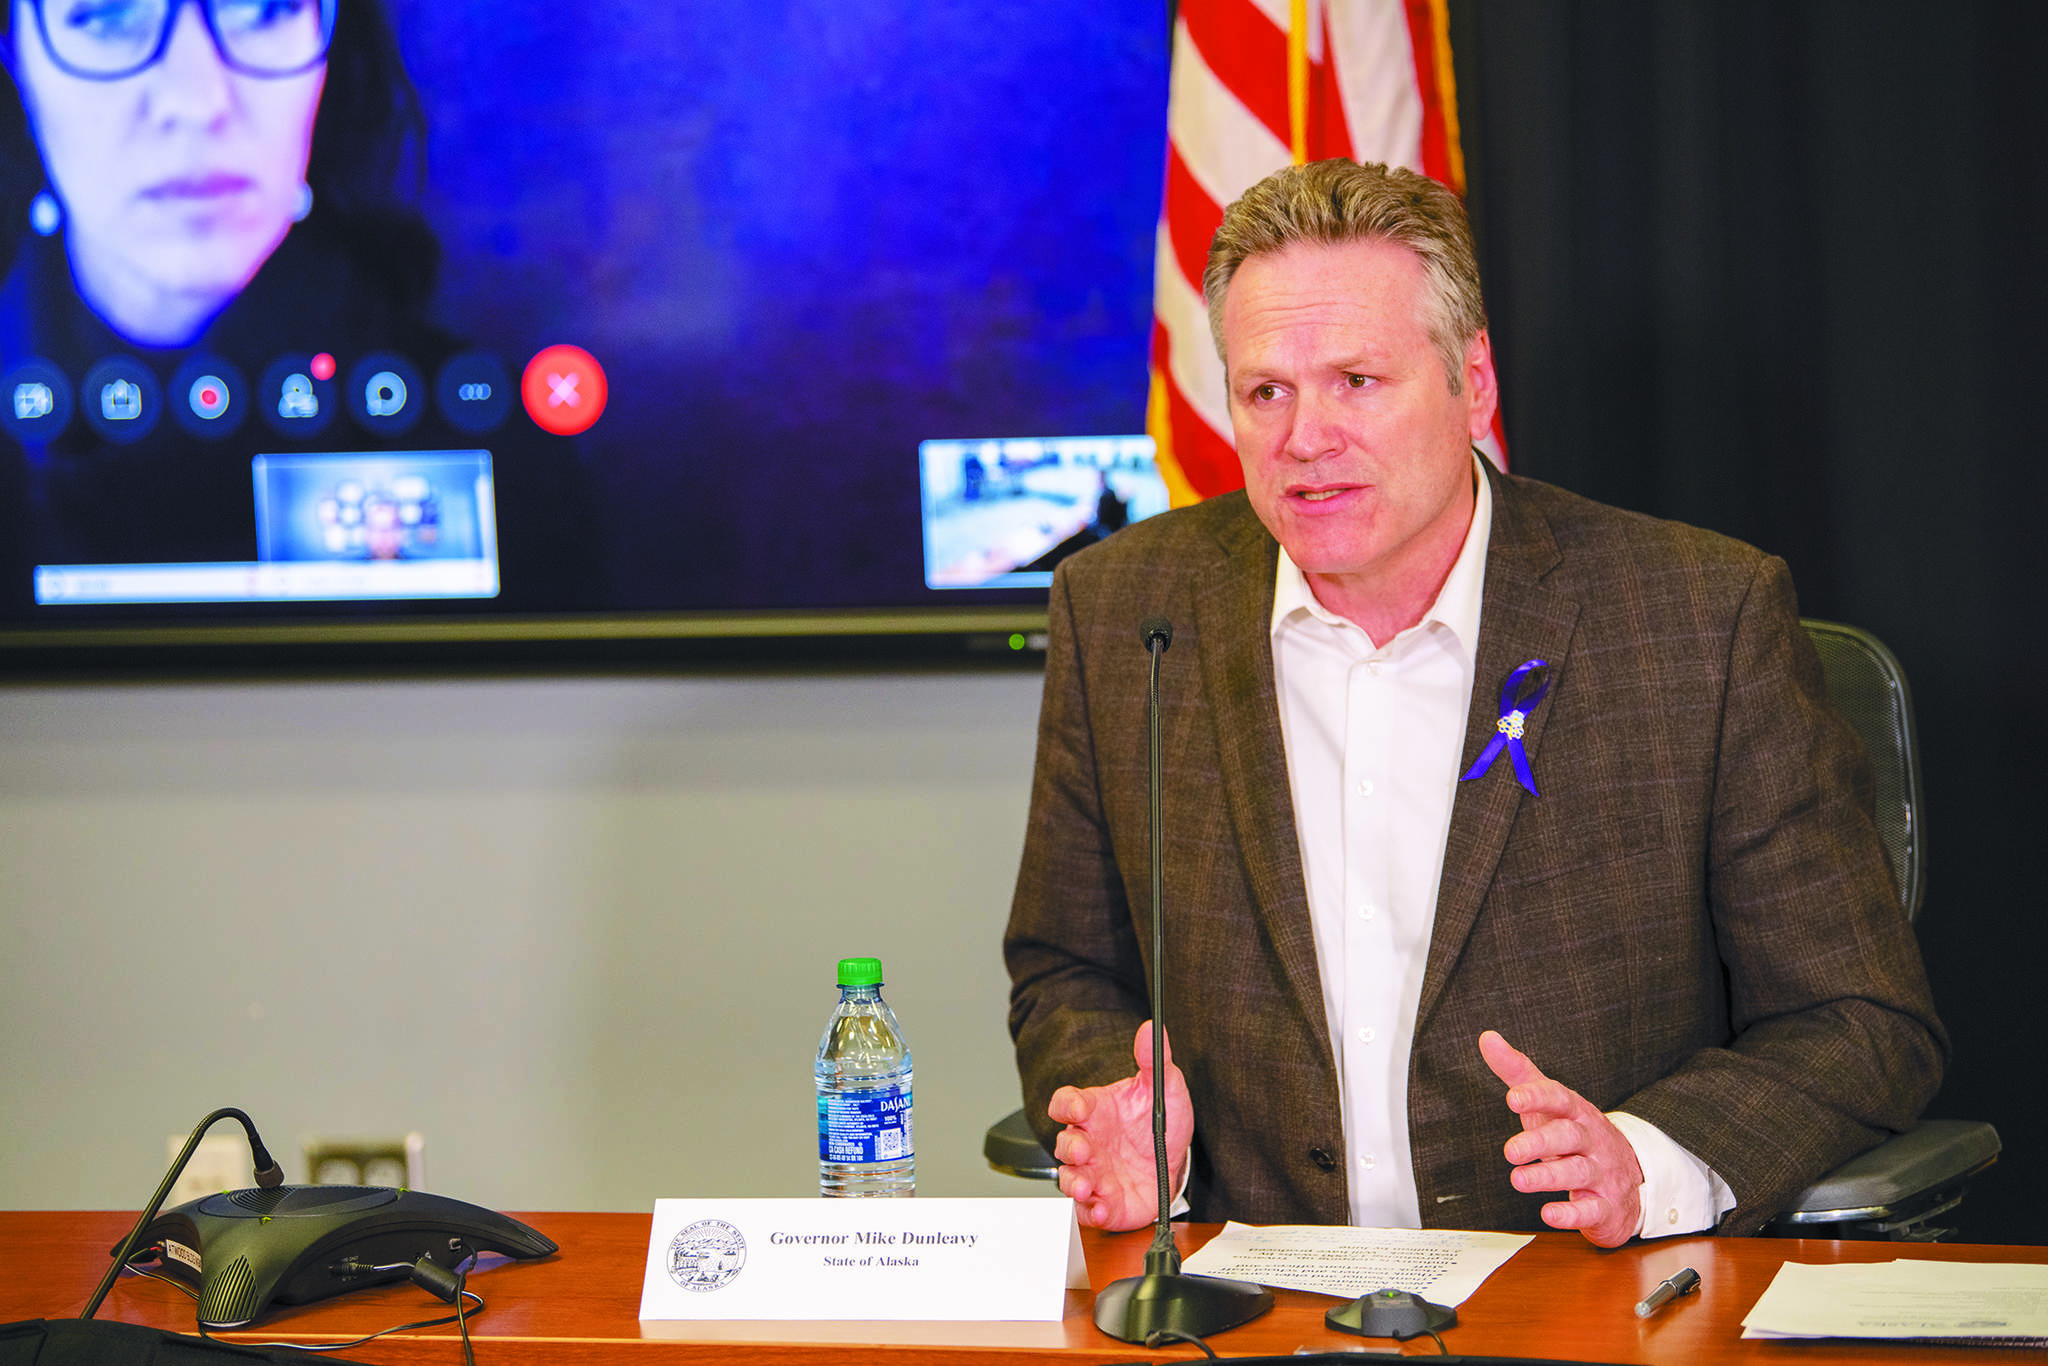 Gov. Mike Dunleavy speaks during a Friday, March 27, 2020 press conference in the Atwood Building in Anchorage, Alaska. (Photo courtesy Office of the Governor)